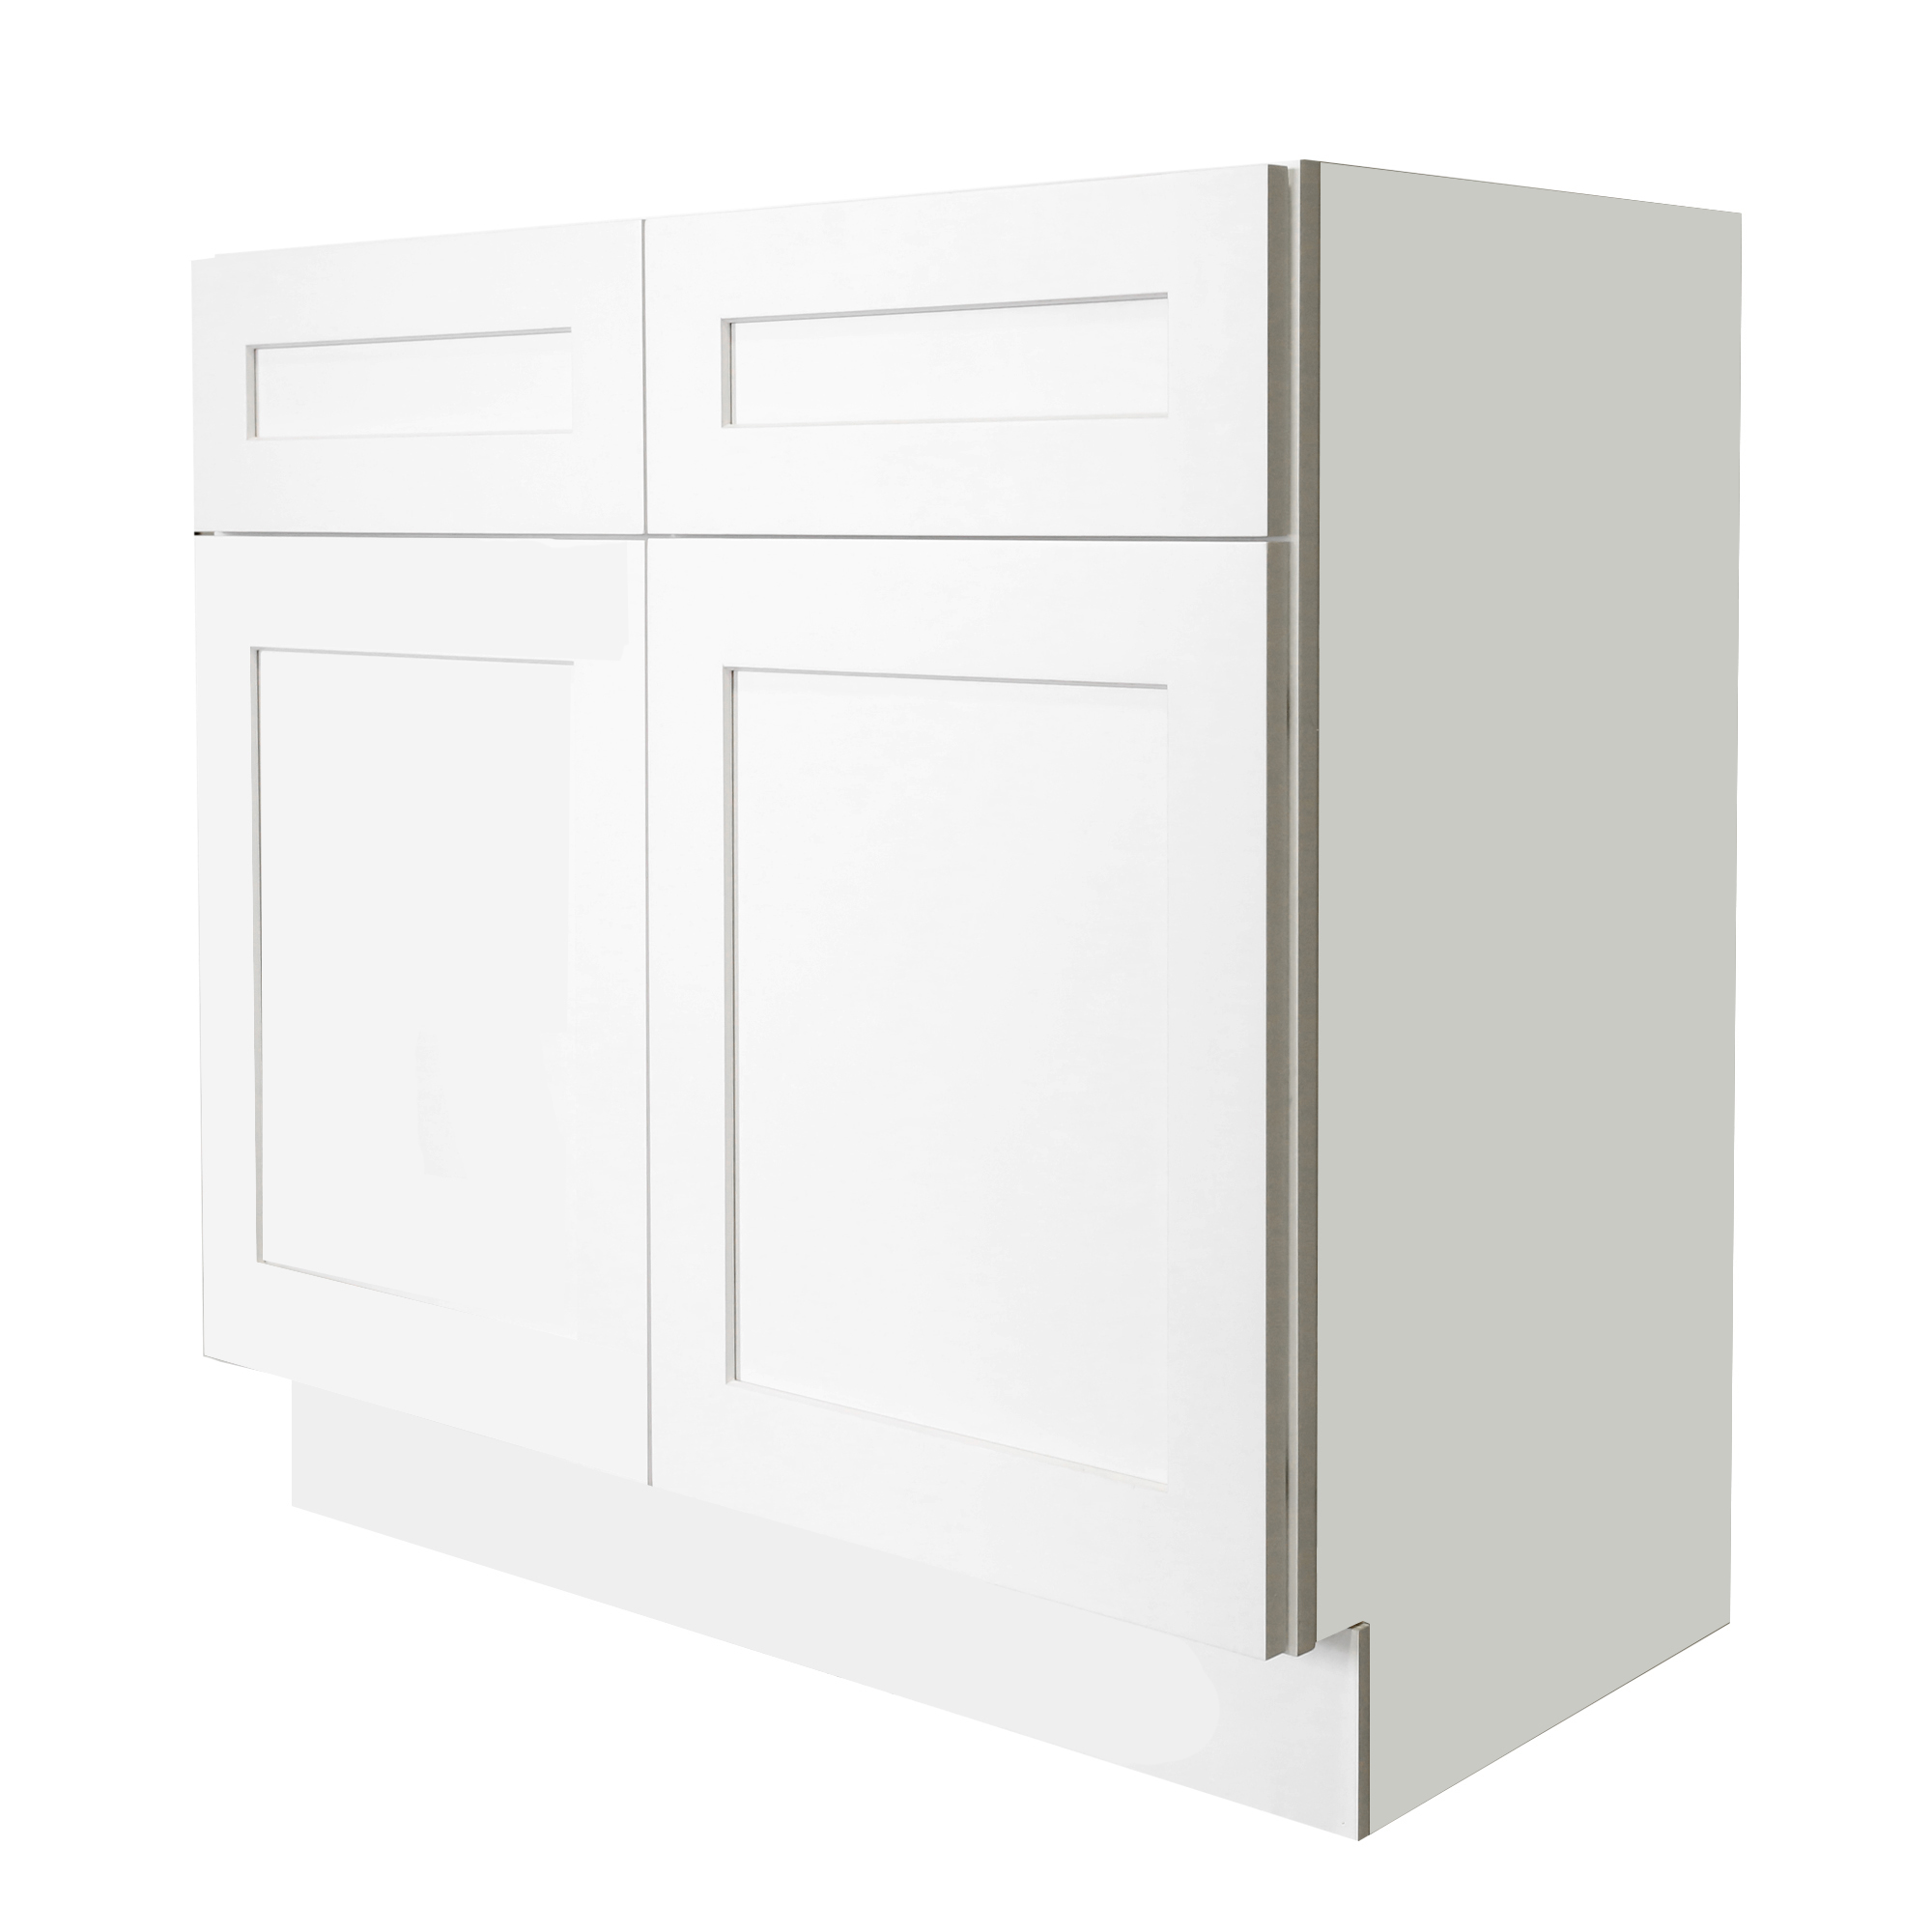 Ready to Assemble 42x34.5x24 in. Shaker Sink Base Cabinet with 2 Doors in White